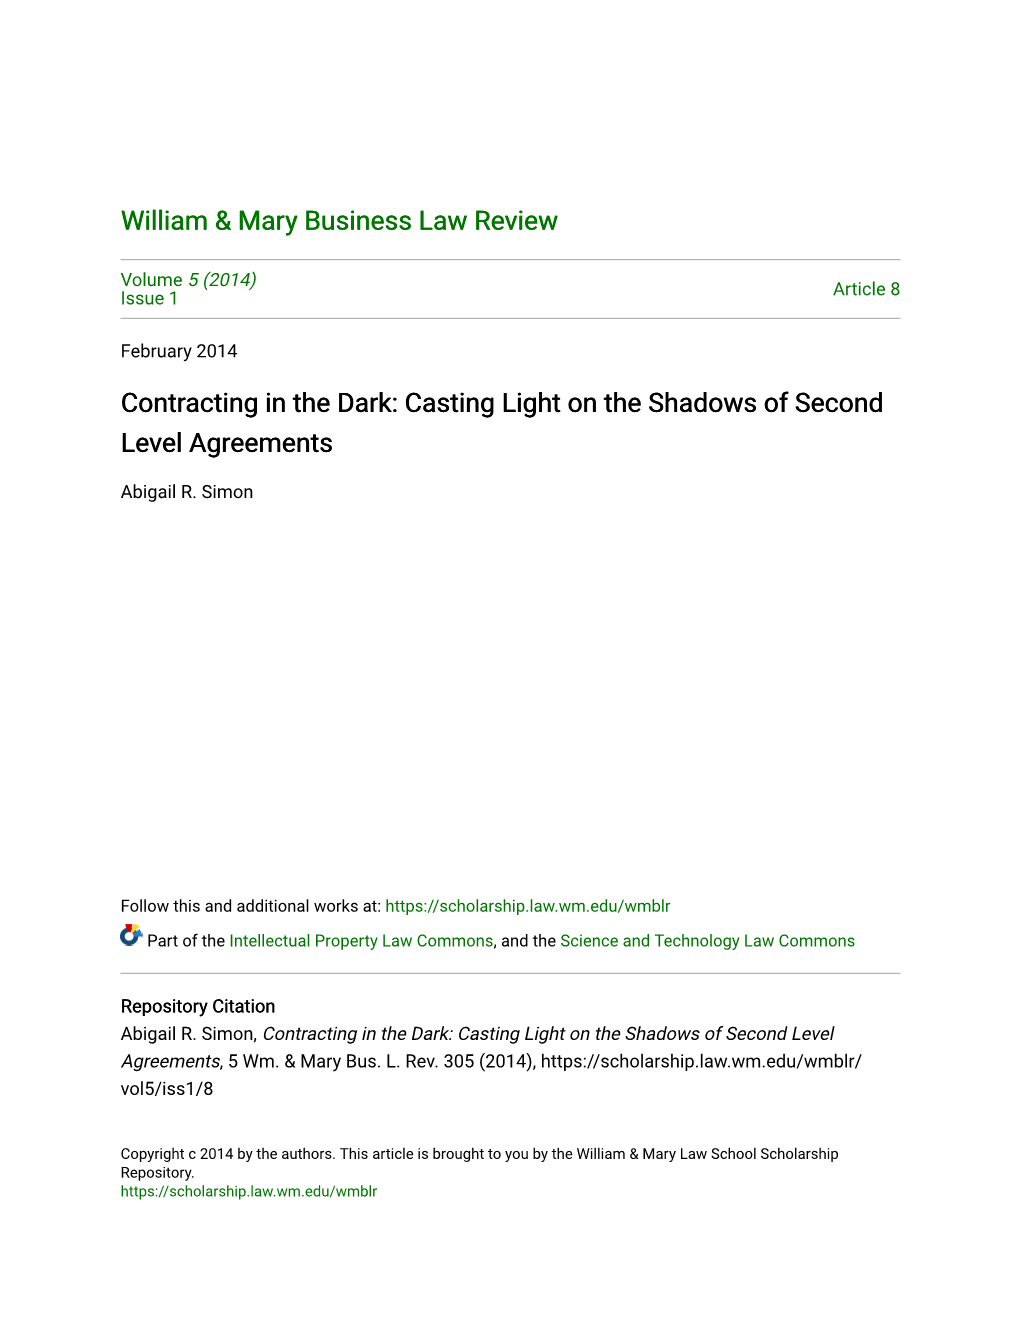 Contracting in the Dark: Casting Light on the Shadows of Second Level Agreements